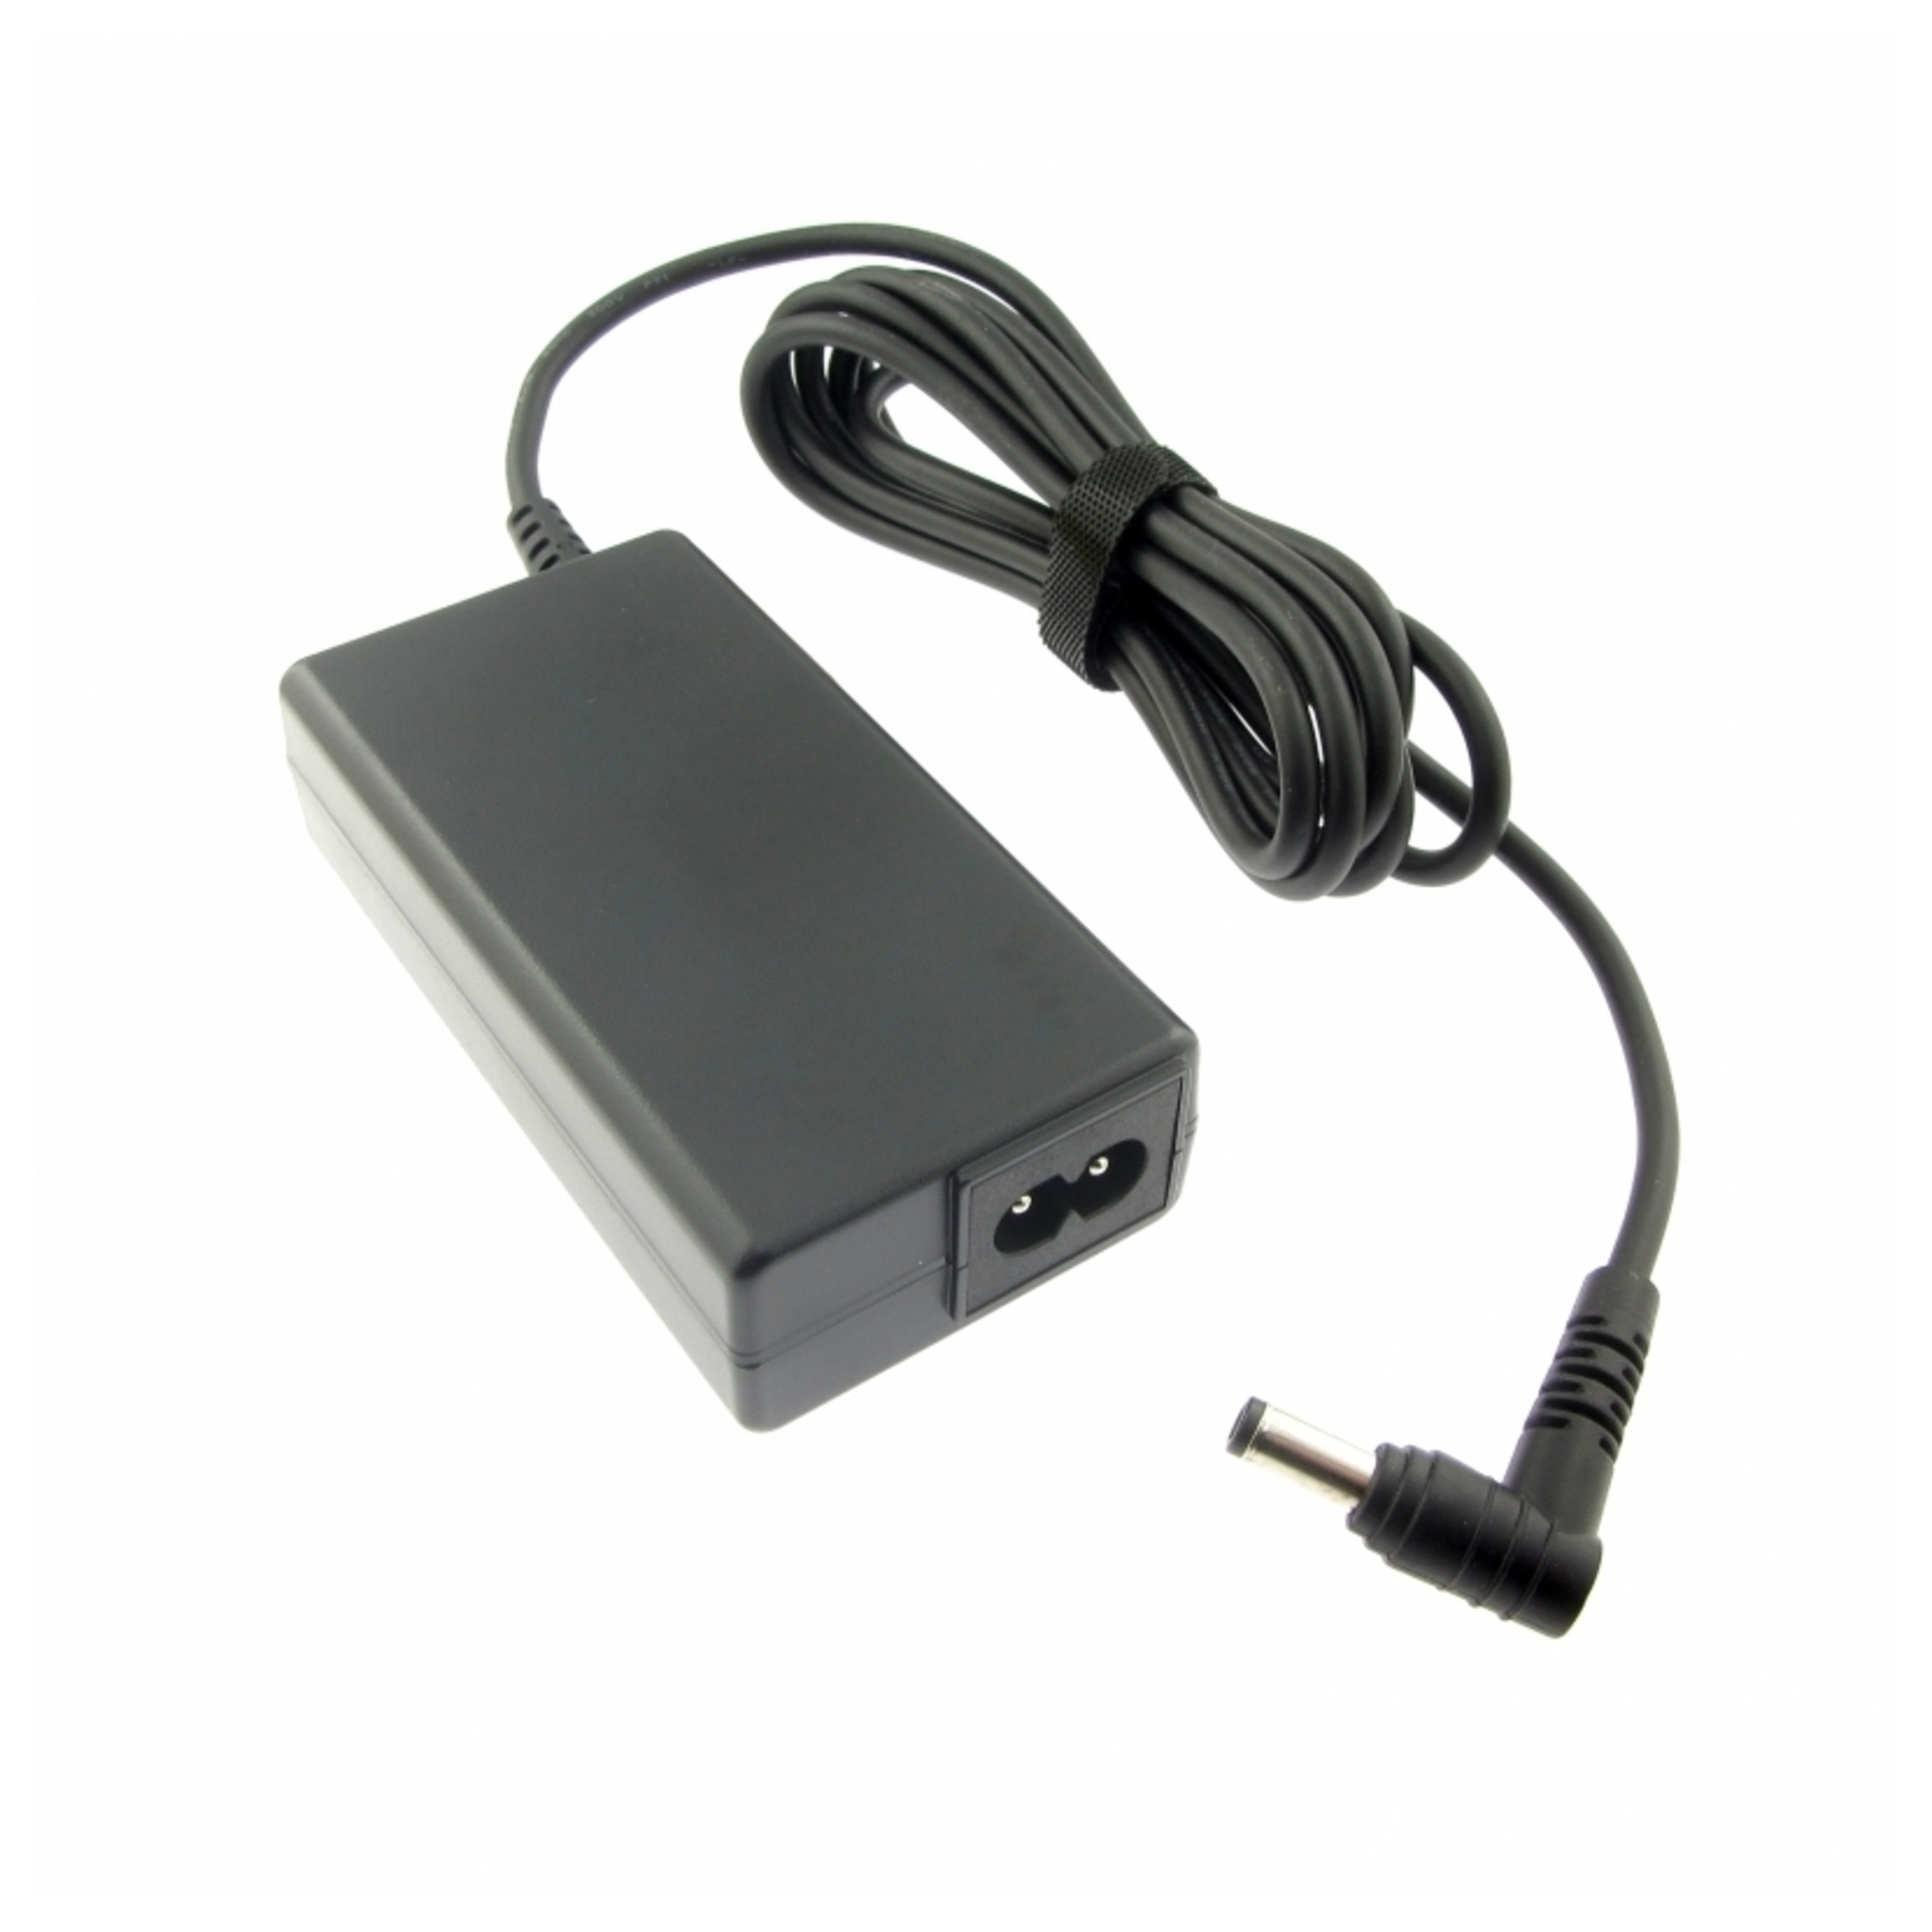 mtxtec charger (power supply), 19v, 3.42a for gigabyte gb-bace-3000, gb-bace-3150, plug 5.5 x 2.5 mm round - neuf